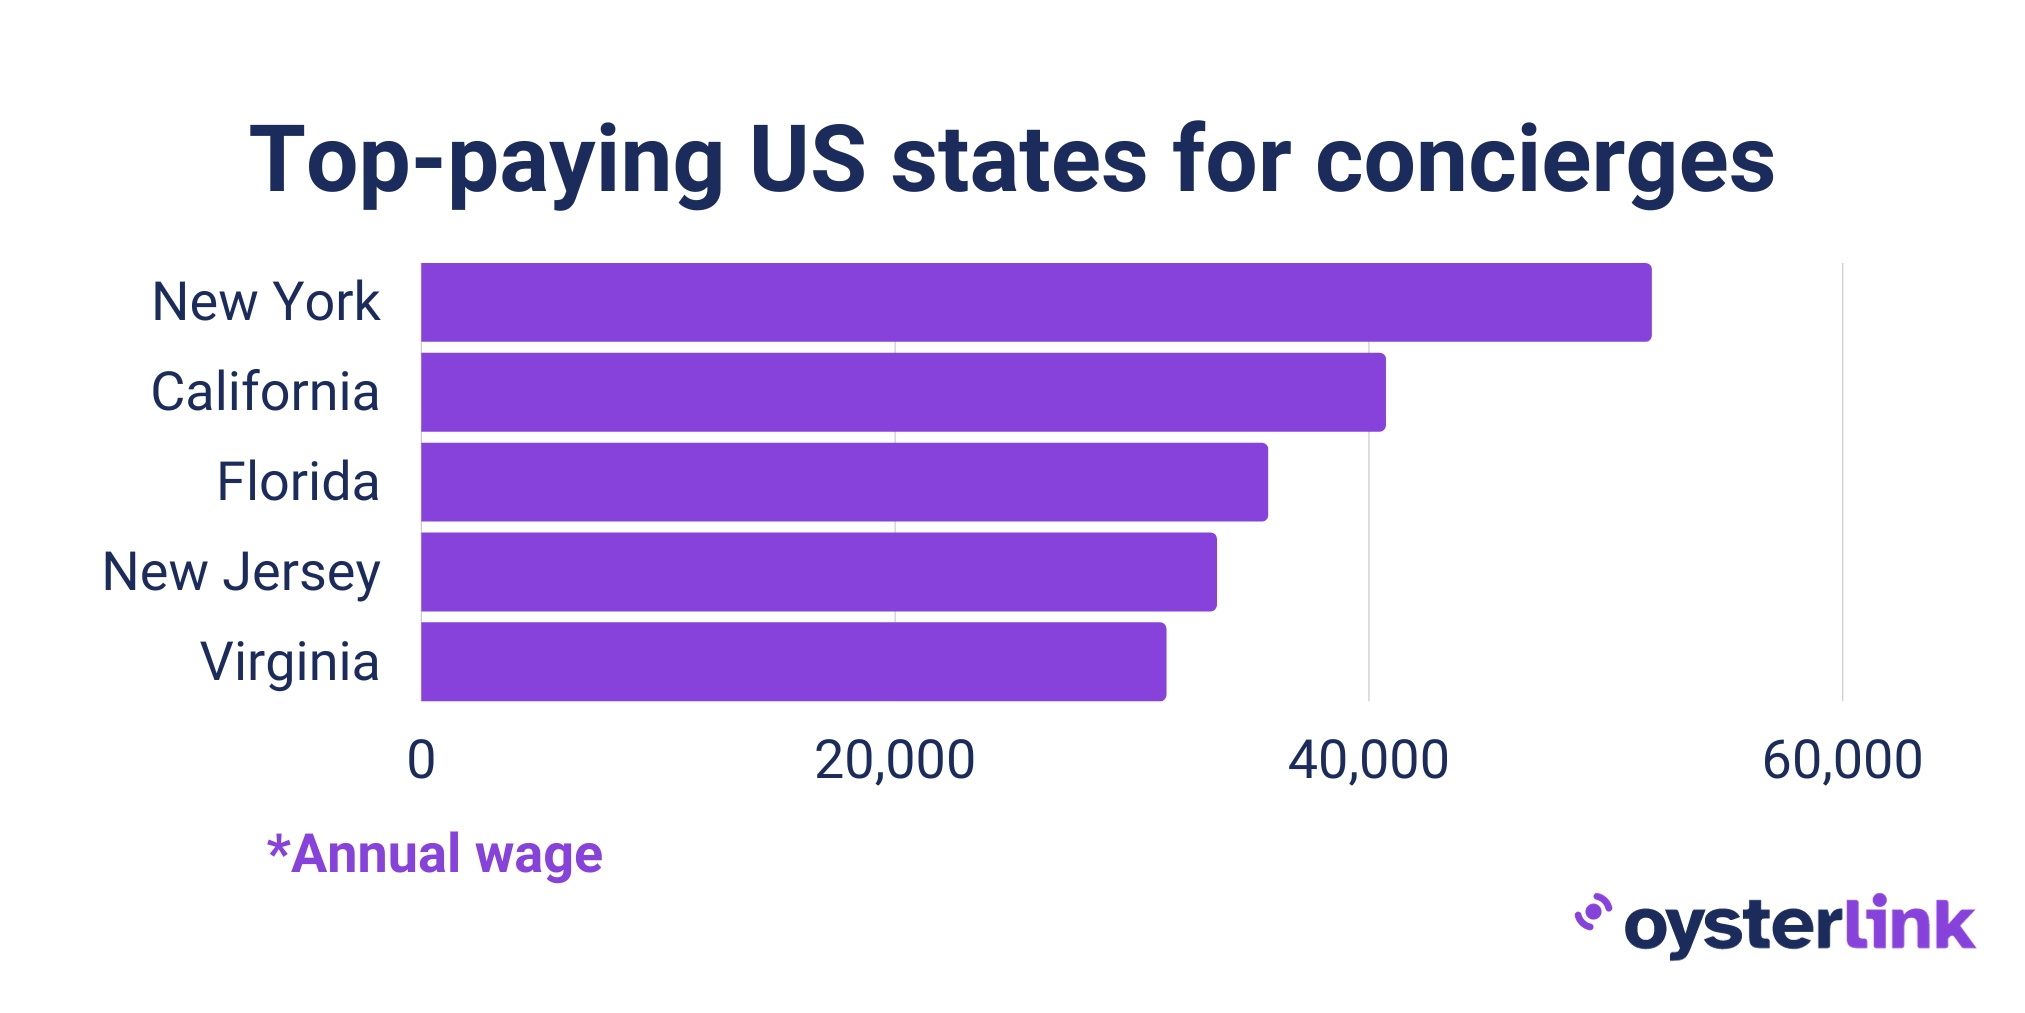 Top-paying U.S. states for concierges